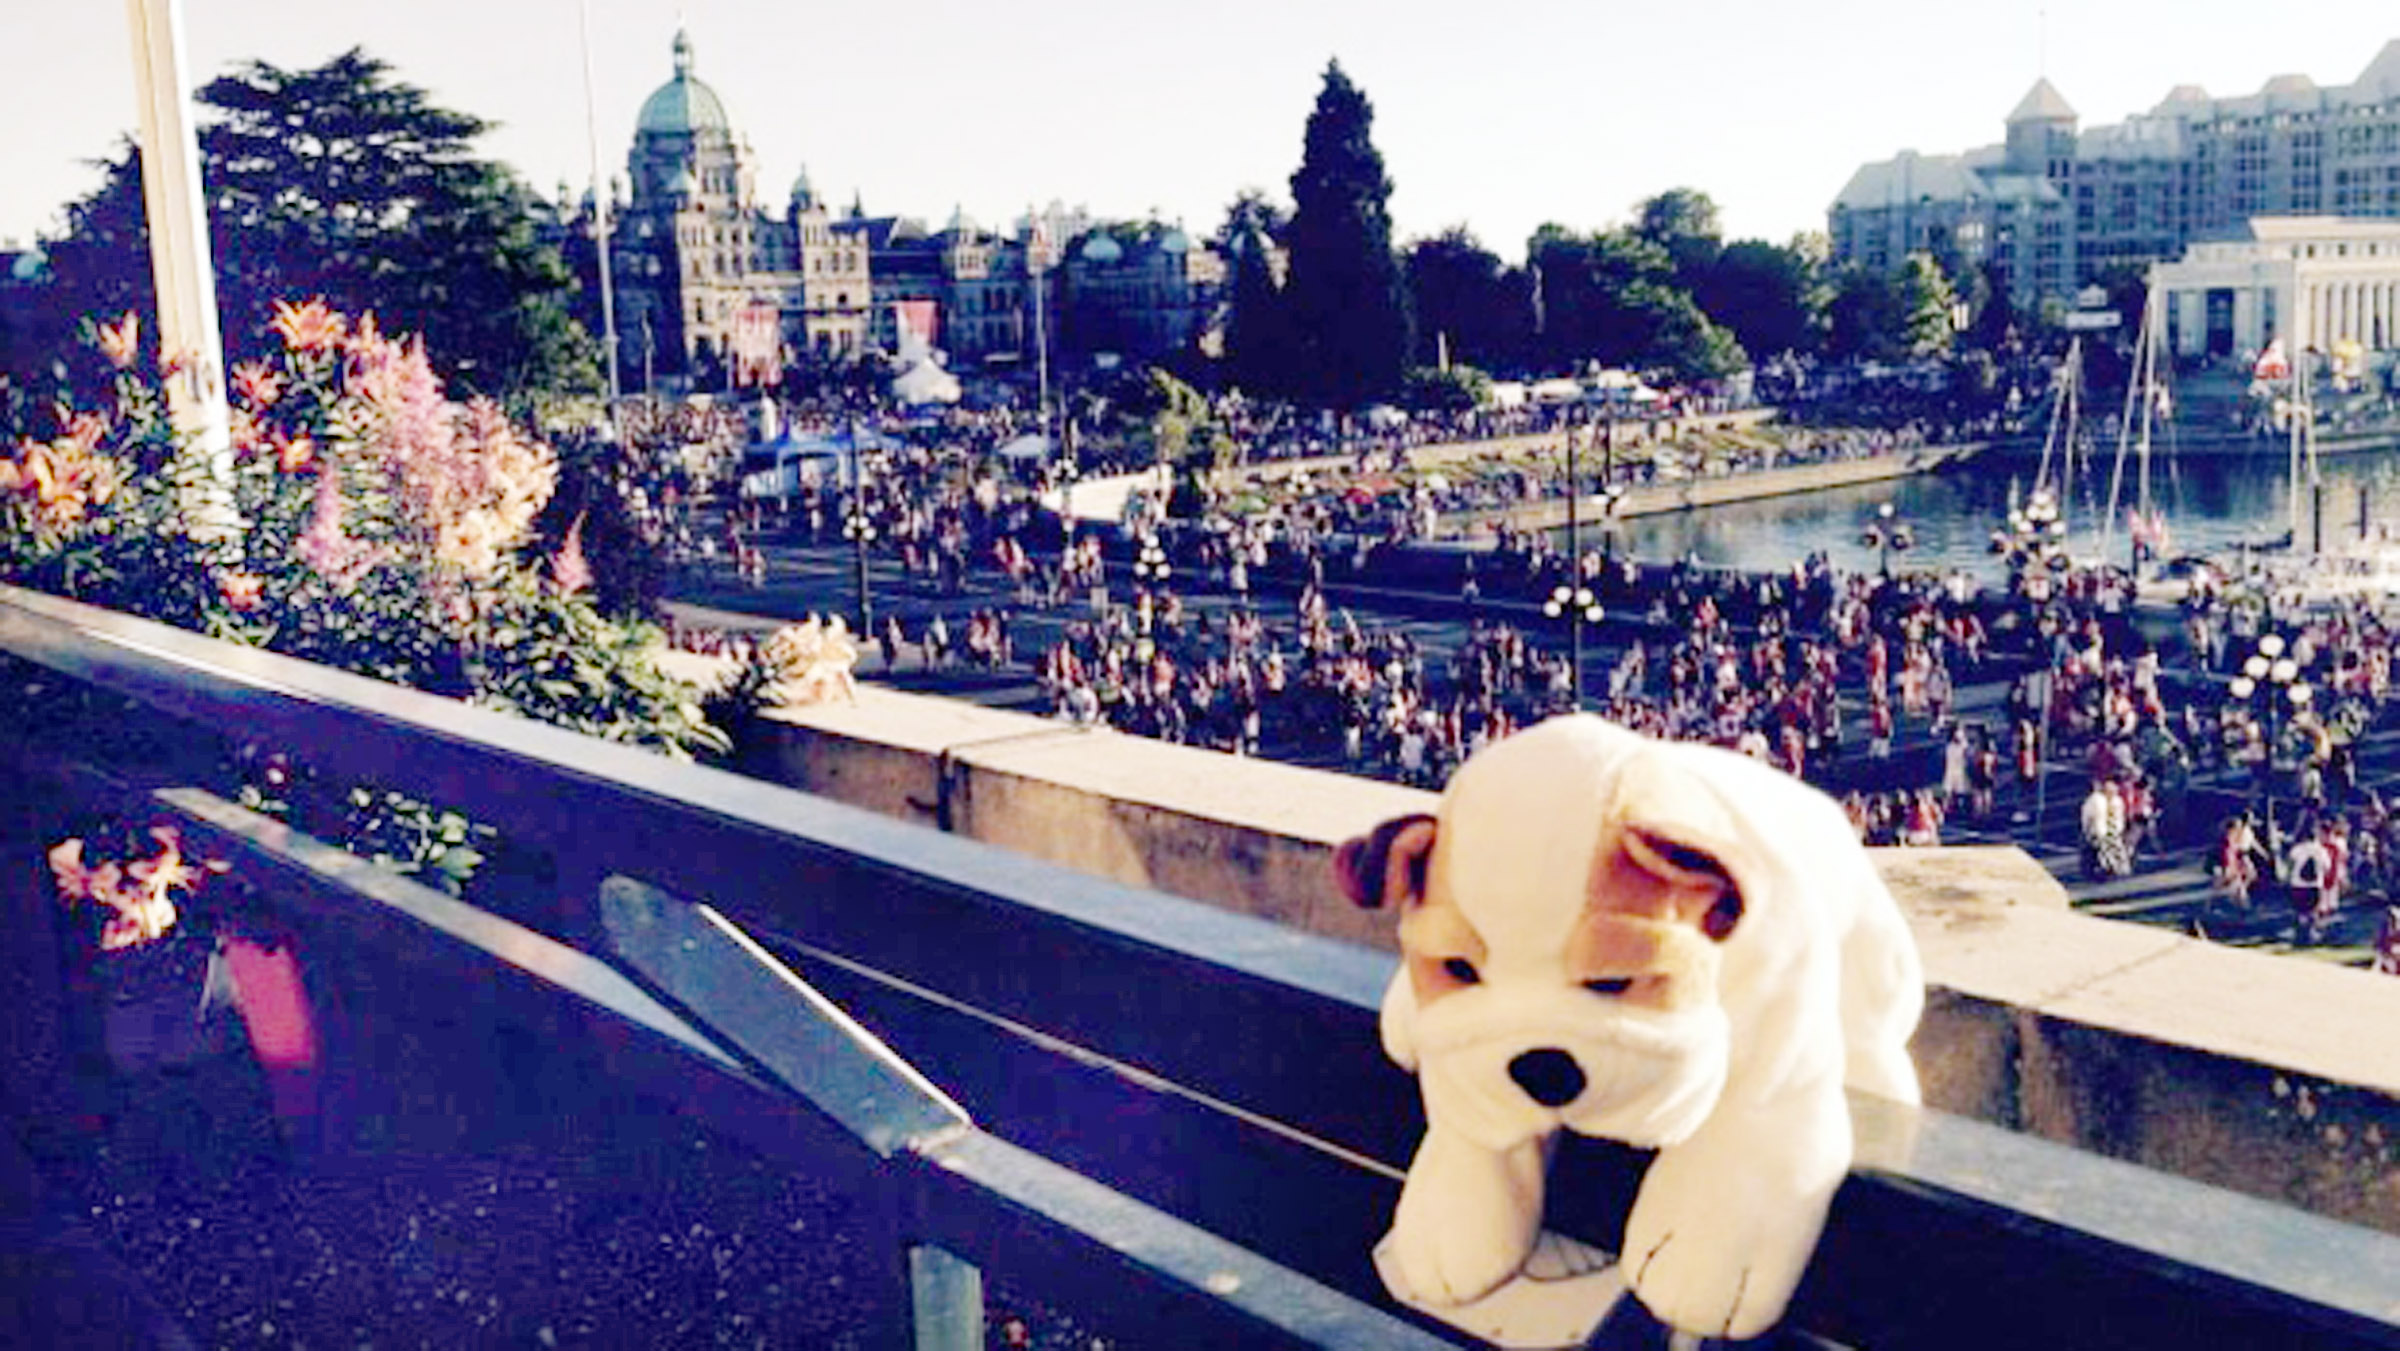 Boris the stuffed dog is posed on a balcony of Victoria’s Fairmont Empress Hotel